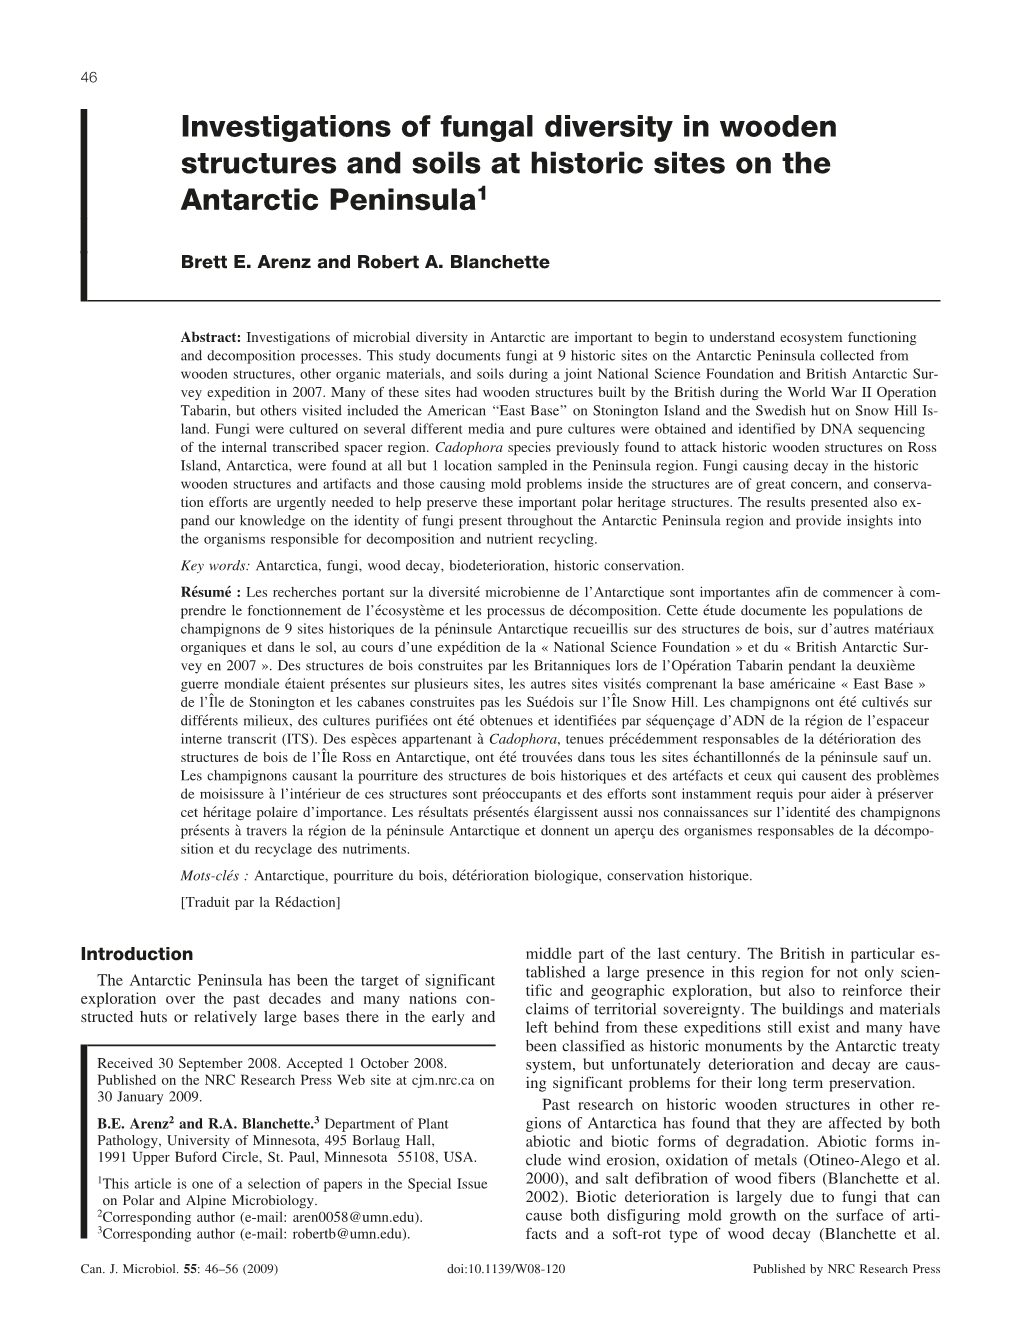 Investigations of Fungal Diversity in Wooden Structures and Soils at Historic Sites on the Antarctic Peninsula1